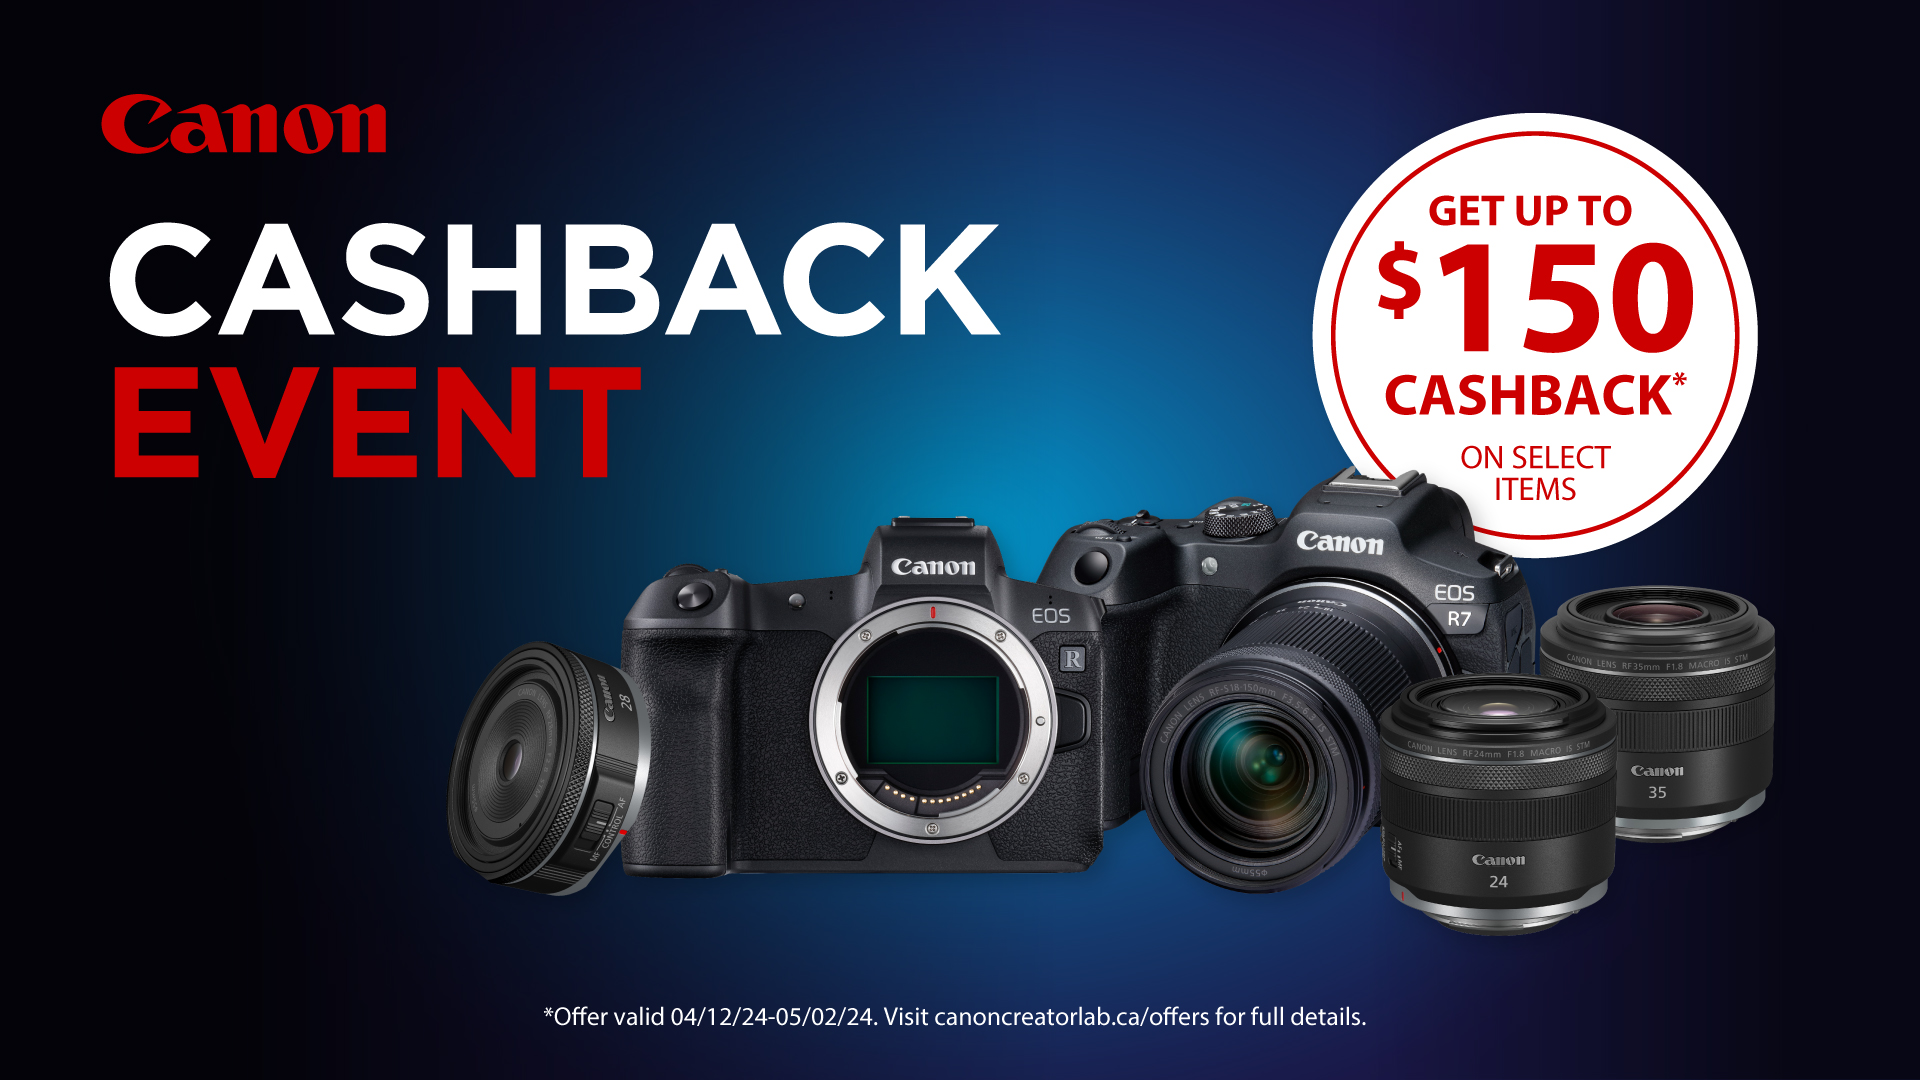 Canon Cashback event. Cameras and Lenses up to $150 Cashback